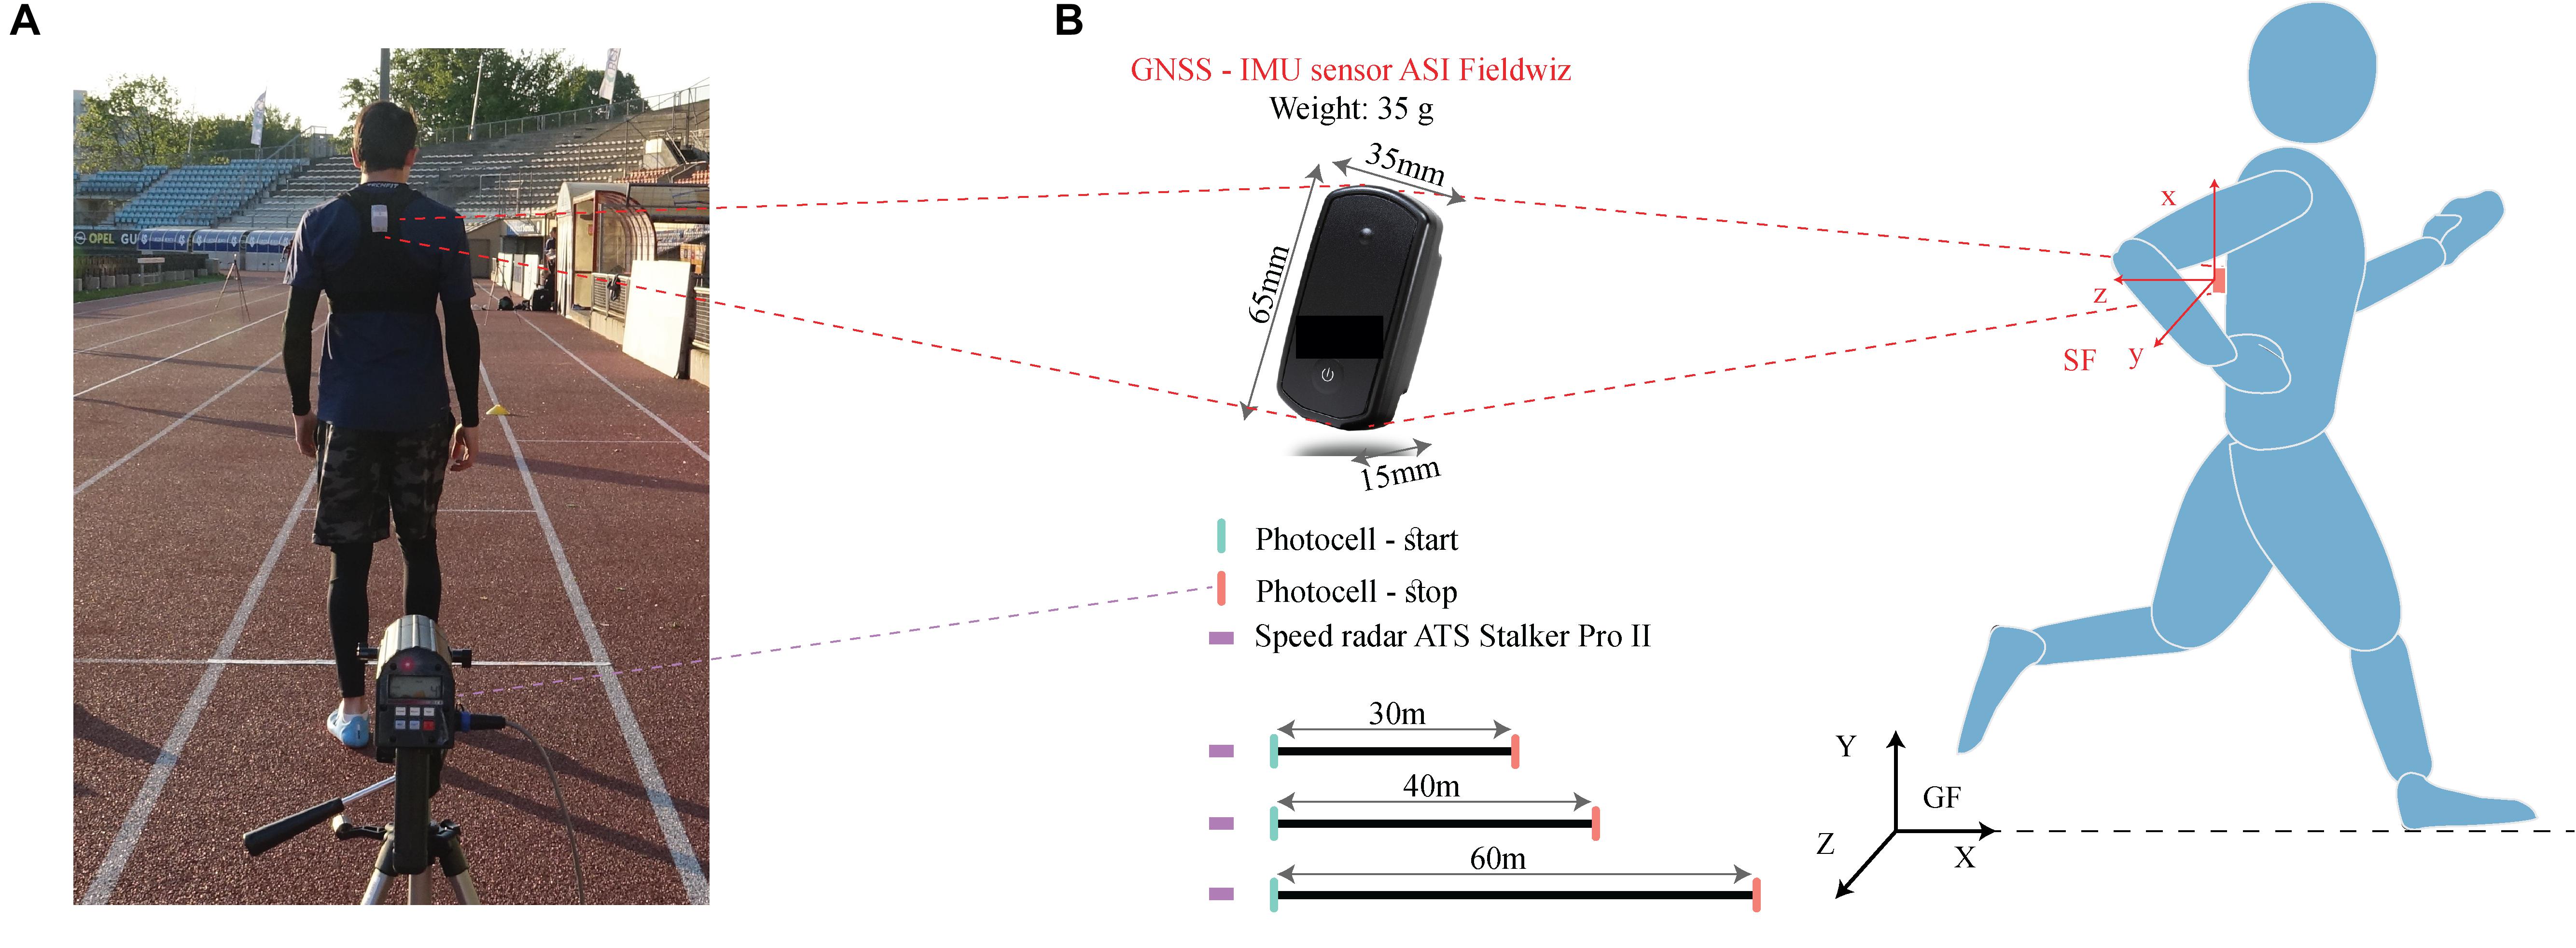 Frontiers  A Sensor Fusion Approach to the Estimation of Instantaneous  Velocity Using Single Wearable Sensor During Sprint